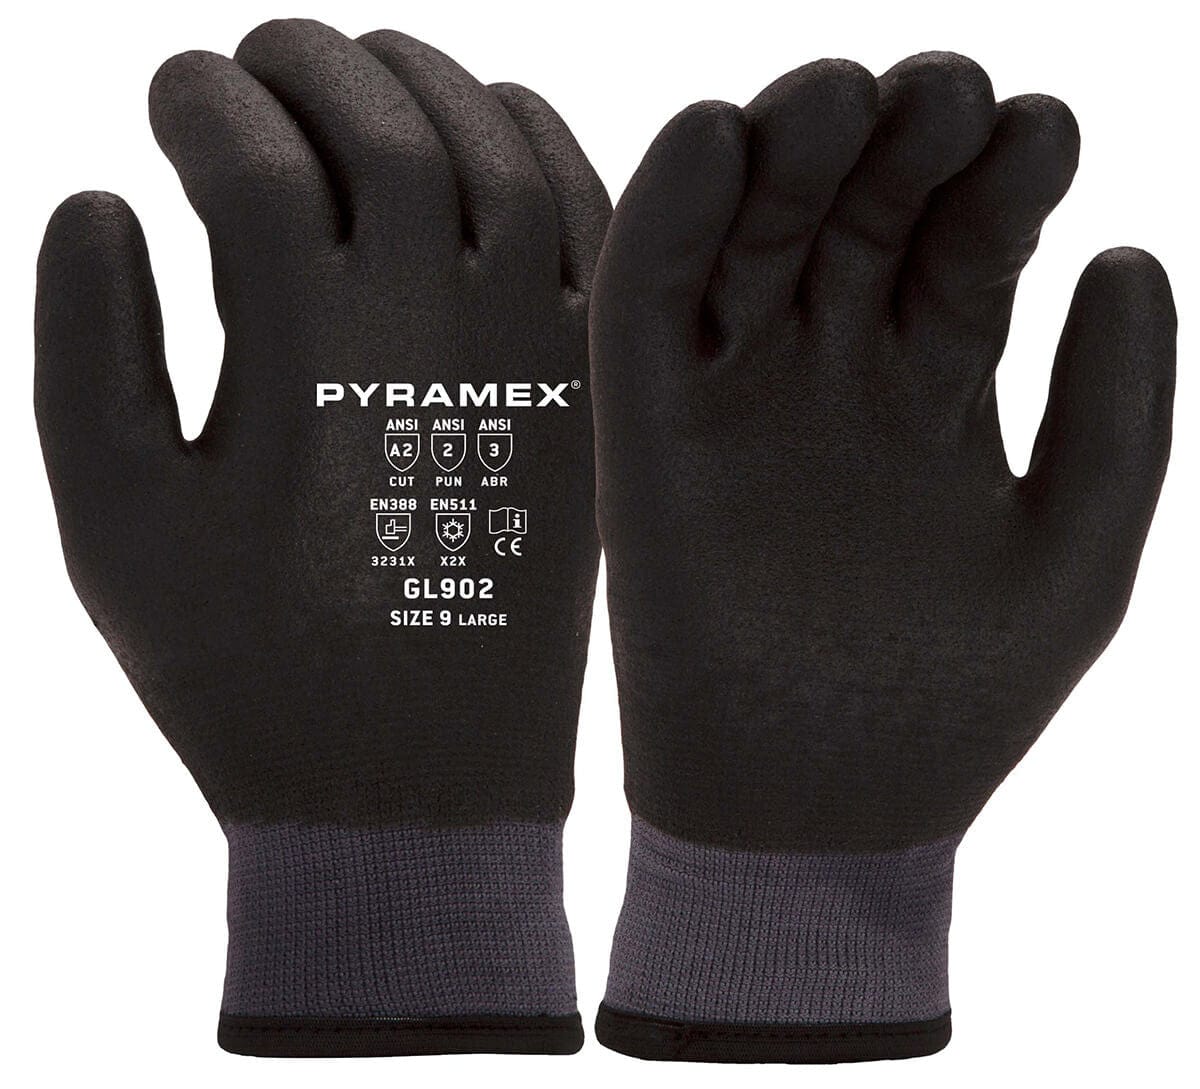 Pyramex GL902 Insulated Cut-Resistant A2 Dipped Gloves GL902